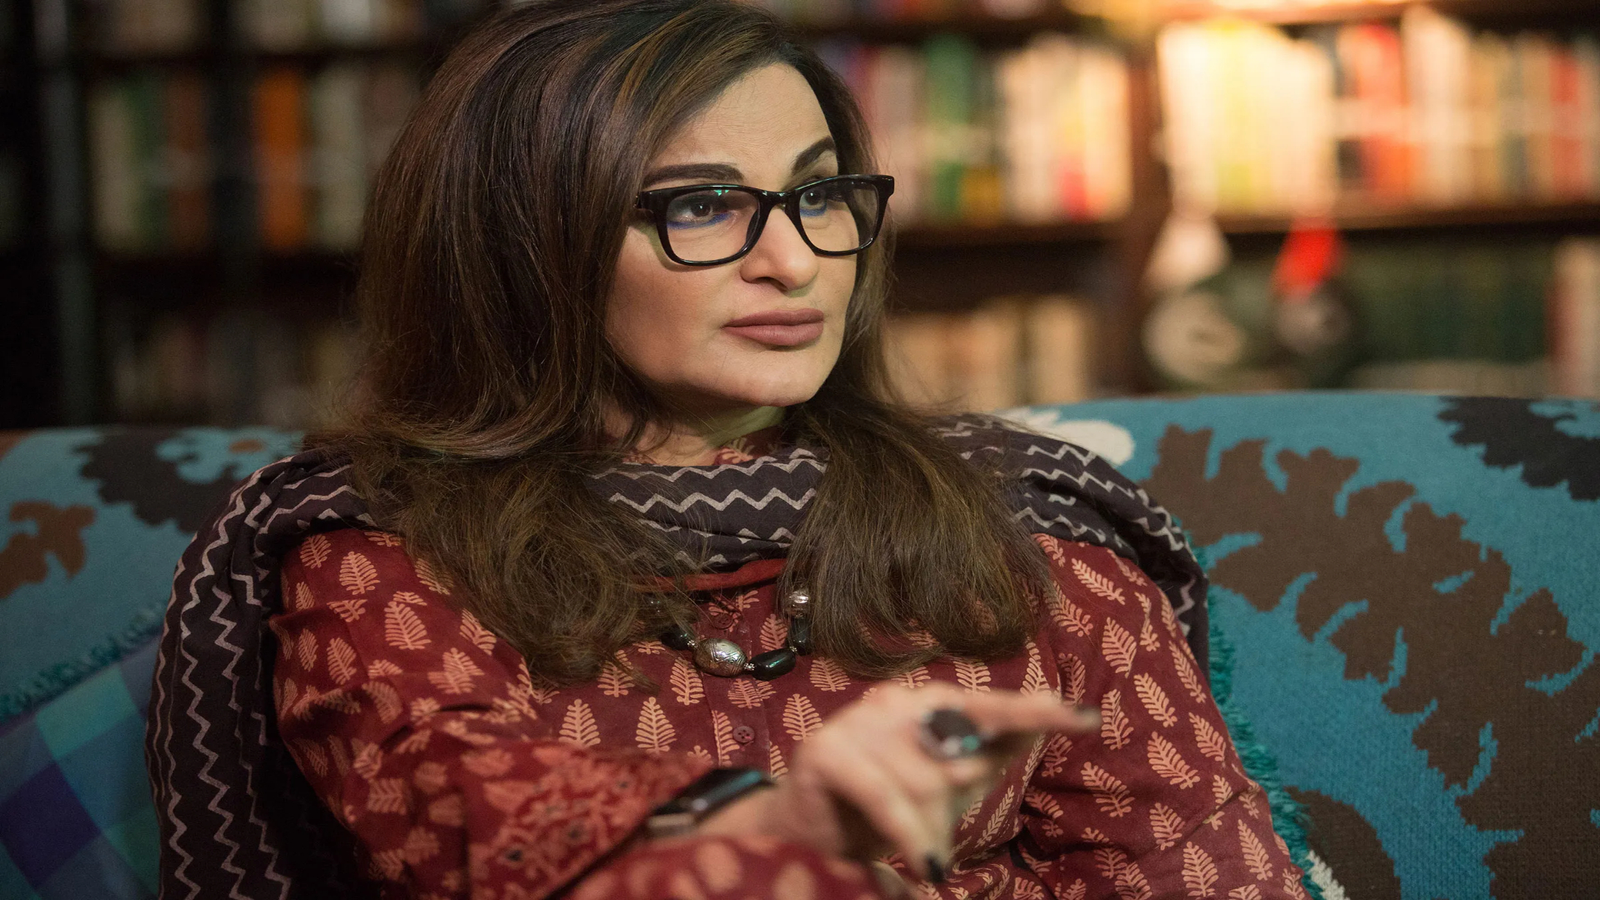 ‘Don’t call me larki’: Sherry Rehman calls for equal respect for women in workplace communication